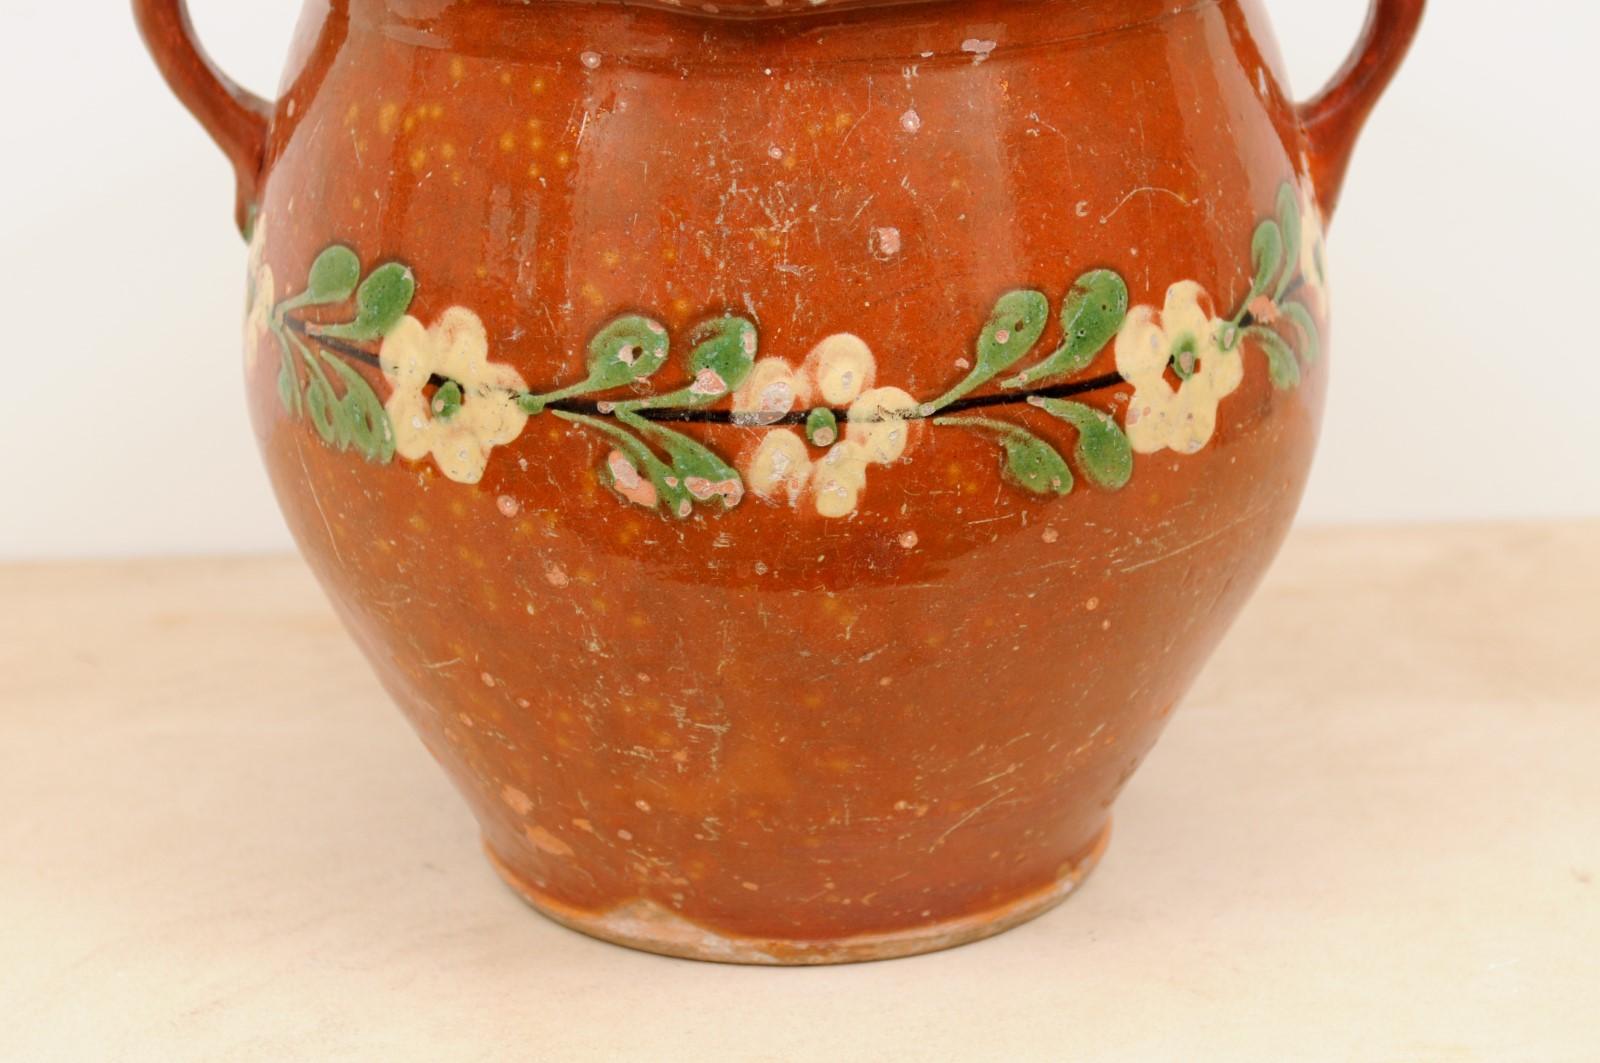 19th Century Rust and Green Glazed Pottery Jug with Floral Decor